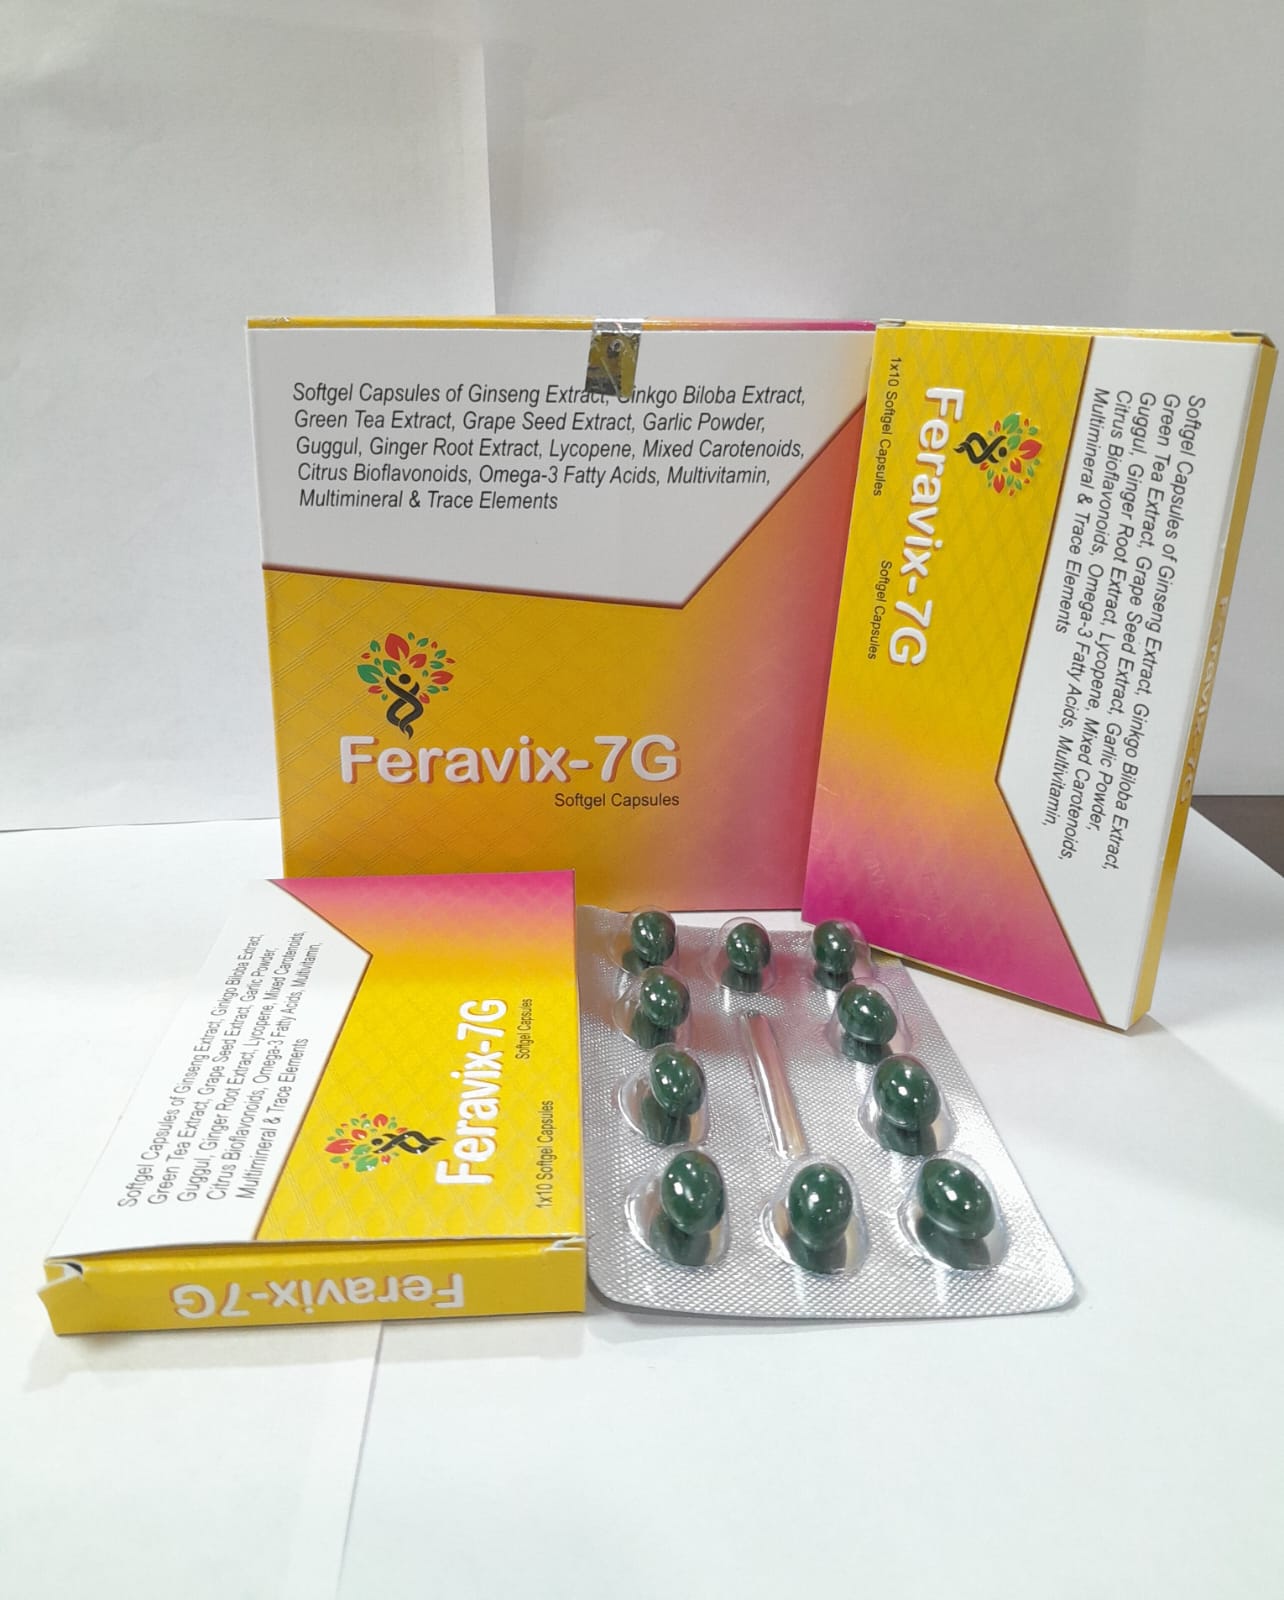 Product Name: FERAVIX 7G Softgel Capsules, Compositions of are Softgel Capsules of Ginseng Extract, Cinkgo Biloba Extrae Green Tea Extract, Grape Seed Extract, Garlic Powder, Guggul, Ginger Root Extract, Lycopene, Mixed Carotenoid Citrus Bioflavonoids, Omega-3 Fatty Acids, Multivitamin,  - Feravix Lifesciences